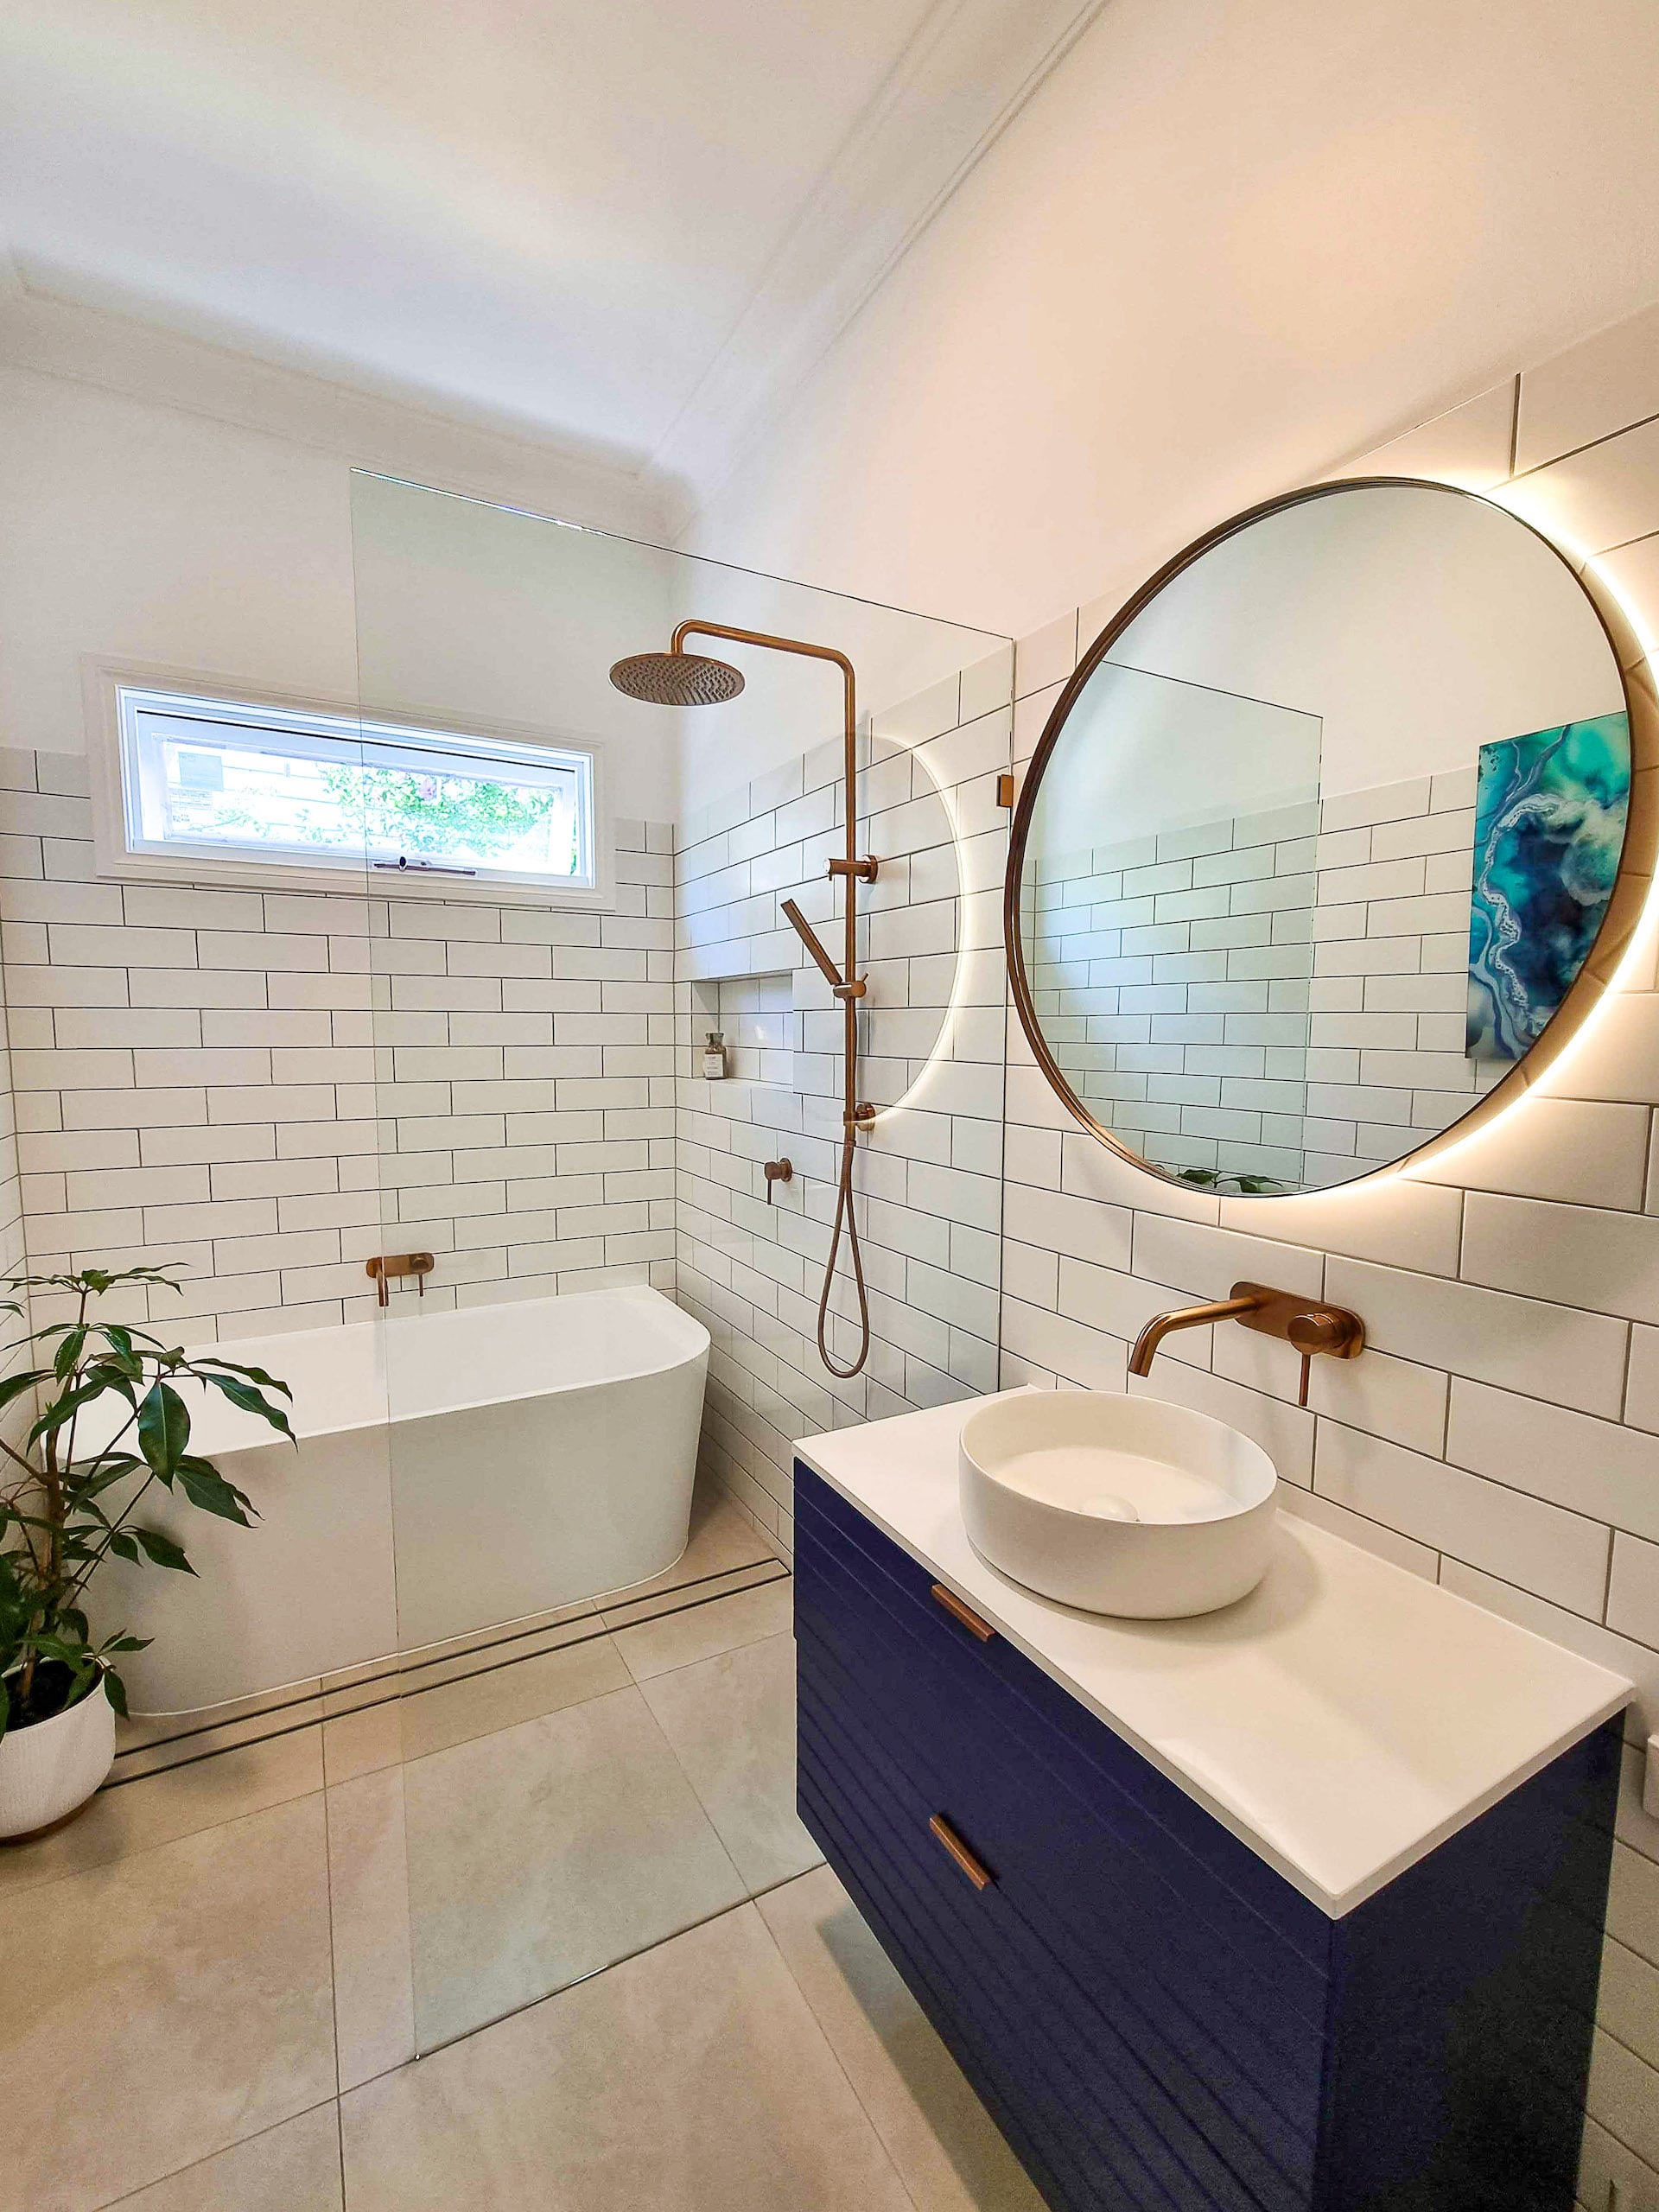 Bathroom Renovations - The Inside Project